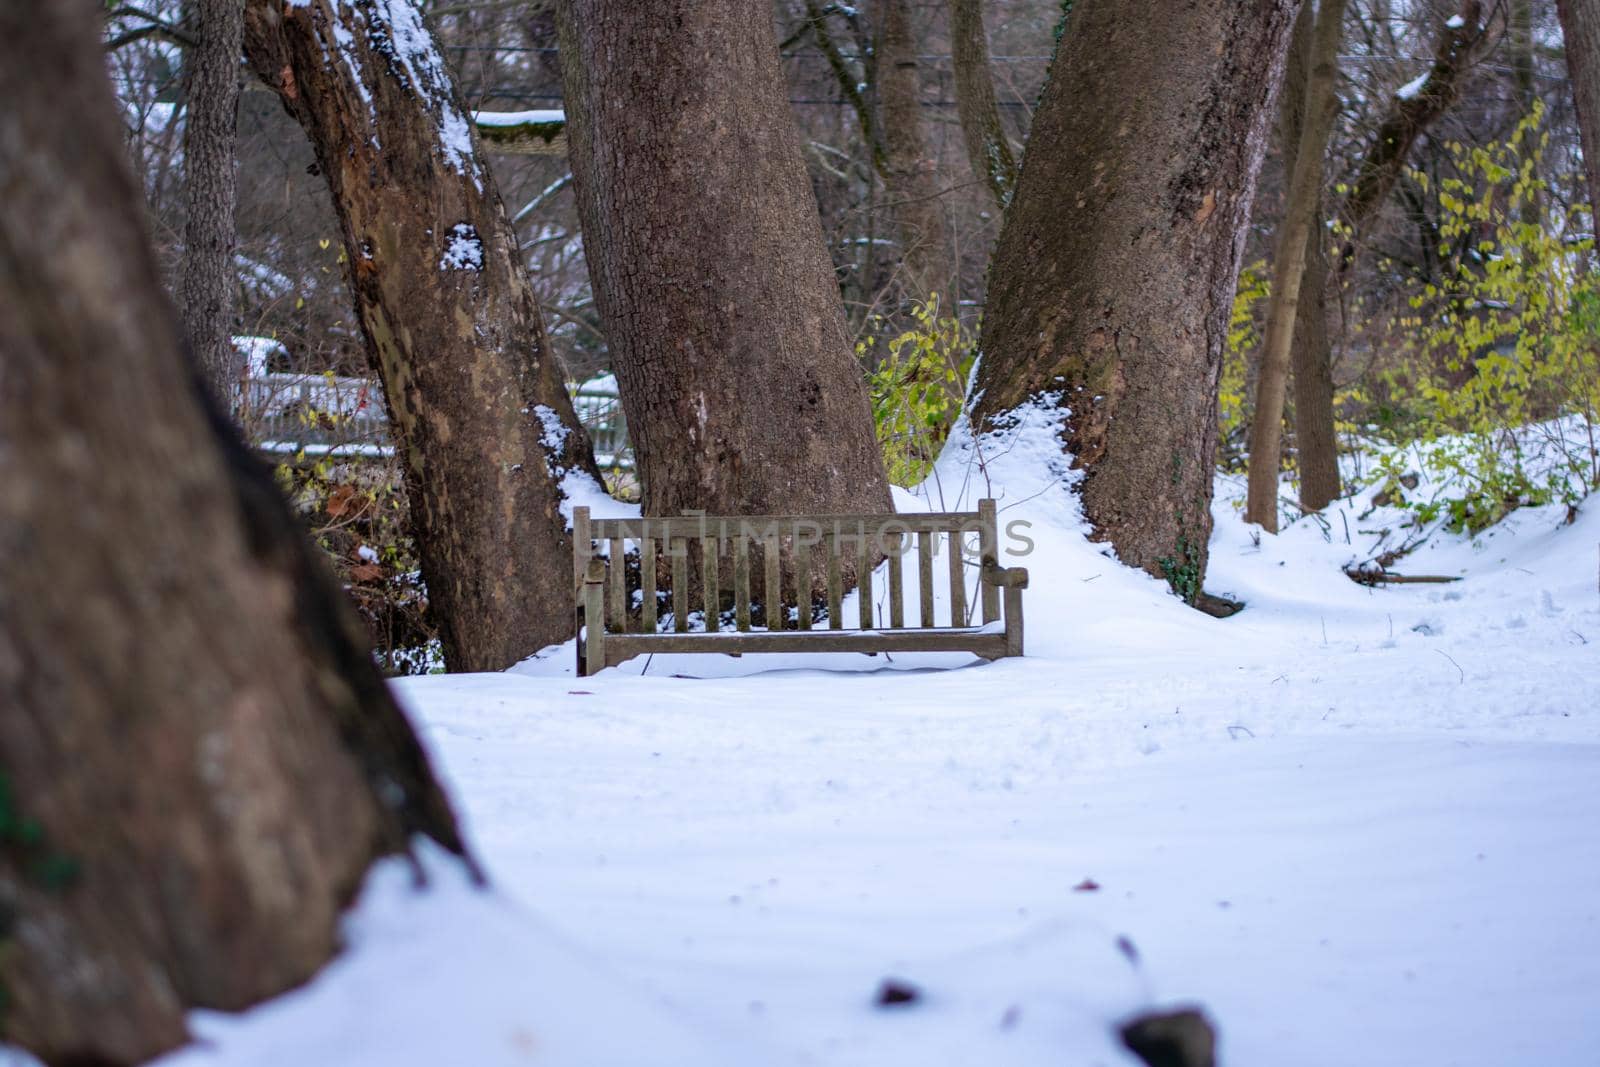 A Park Bench Next to a Tree in a Park Covered in Snow by bju12290